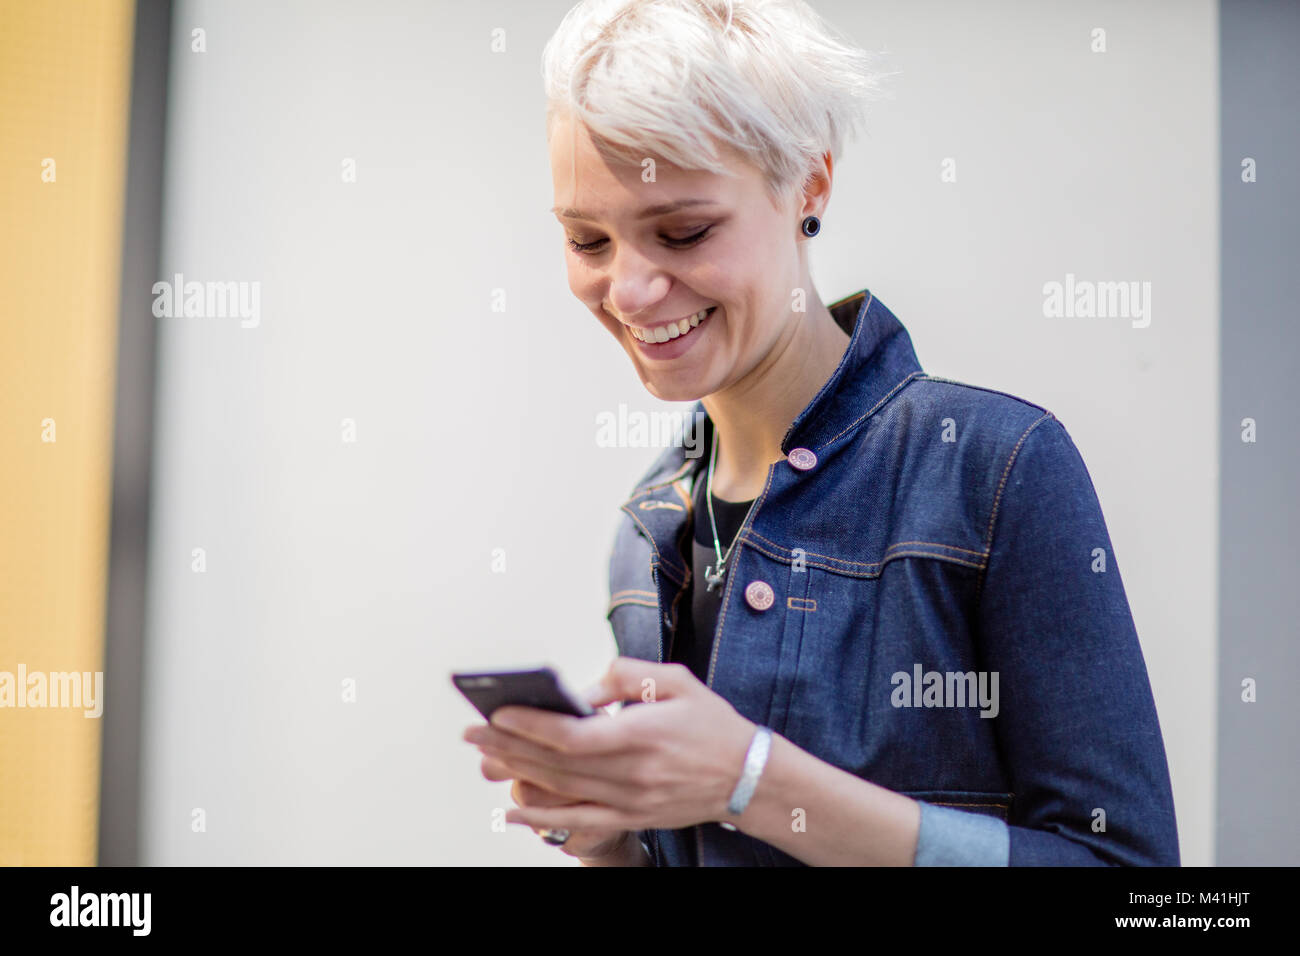 Young adult walking down street and checking smartphone Stock Photo